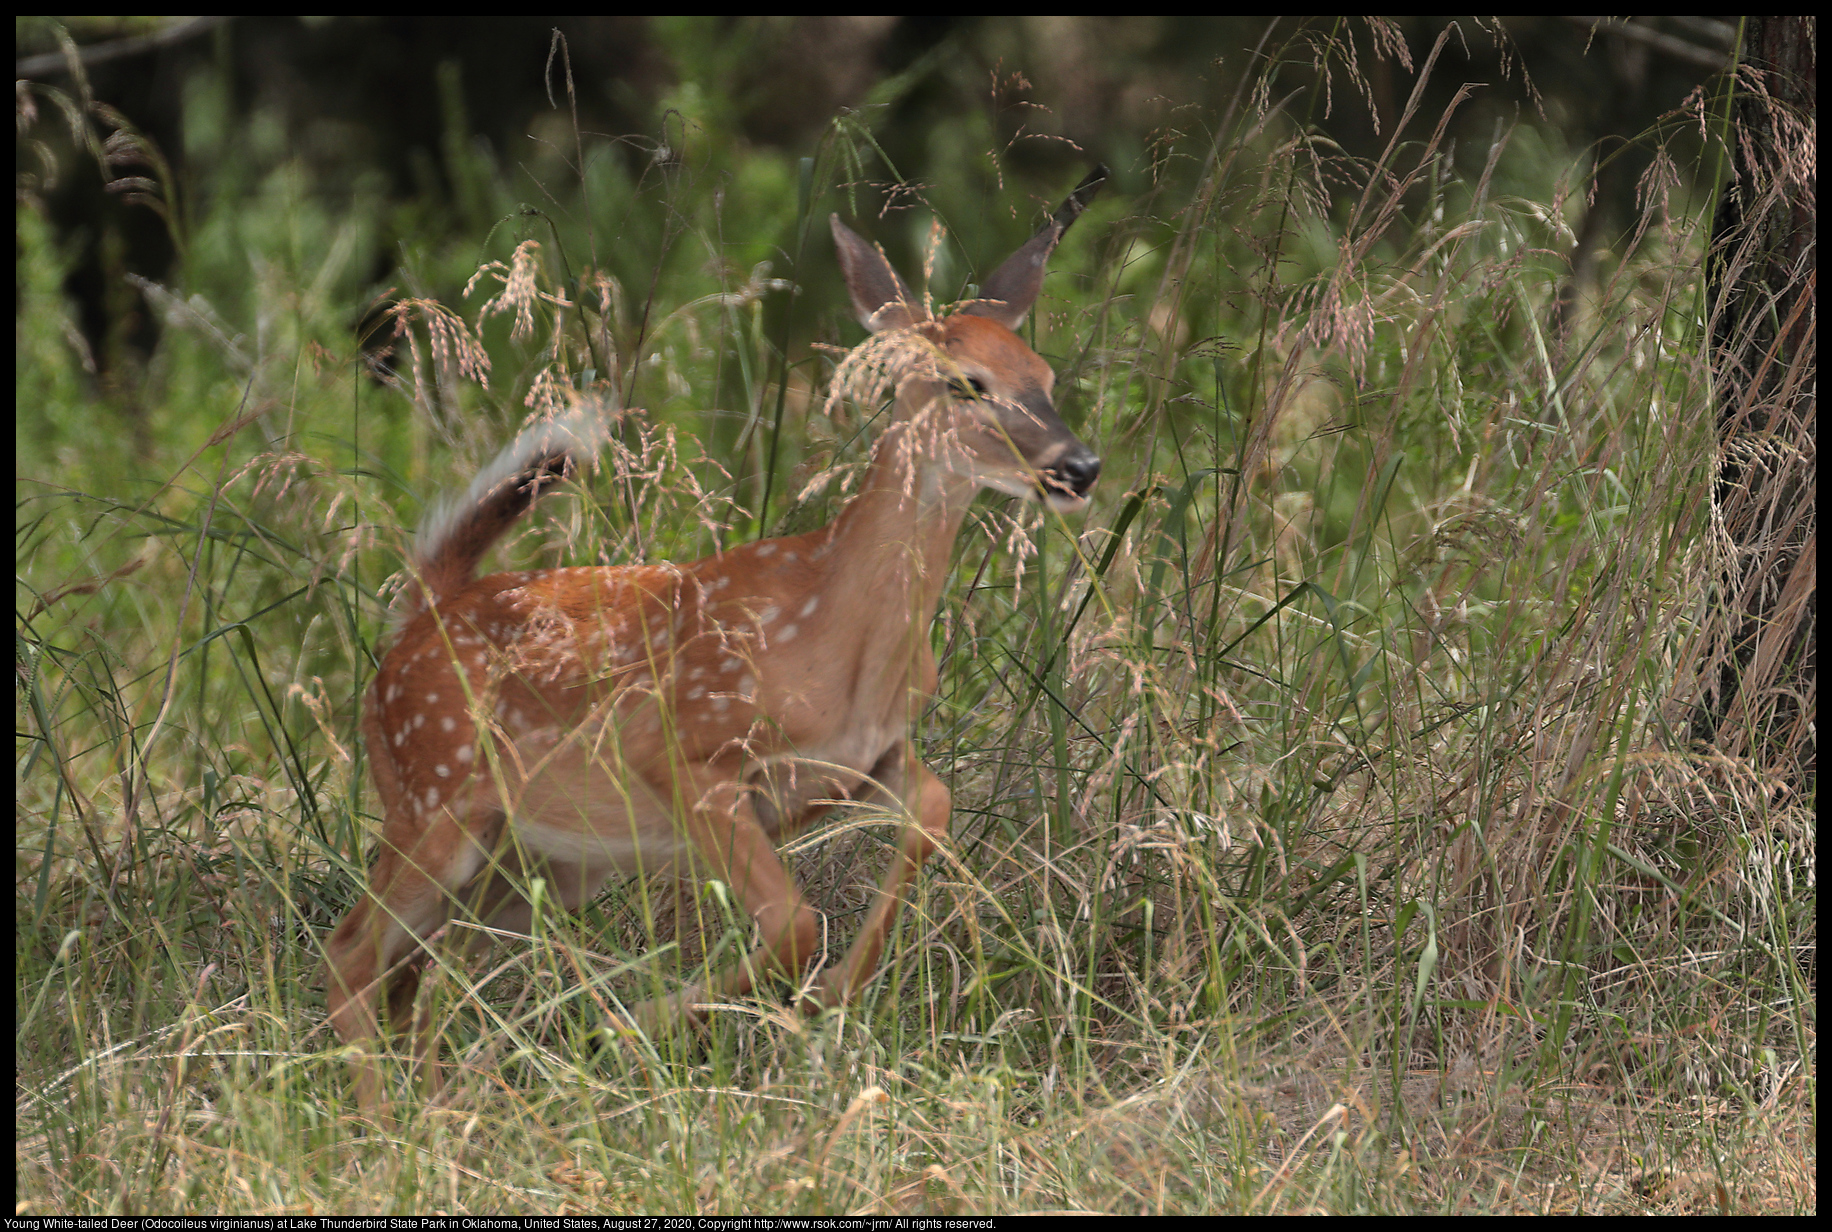 Young White-tailed Deer (Odocoileus virginianus) at Lake Thunderbird State Park in Oklahoma, United States, August 27, 2020